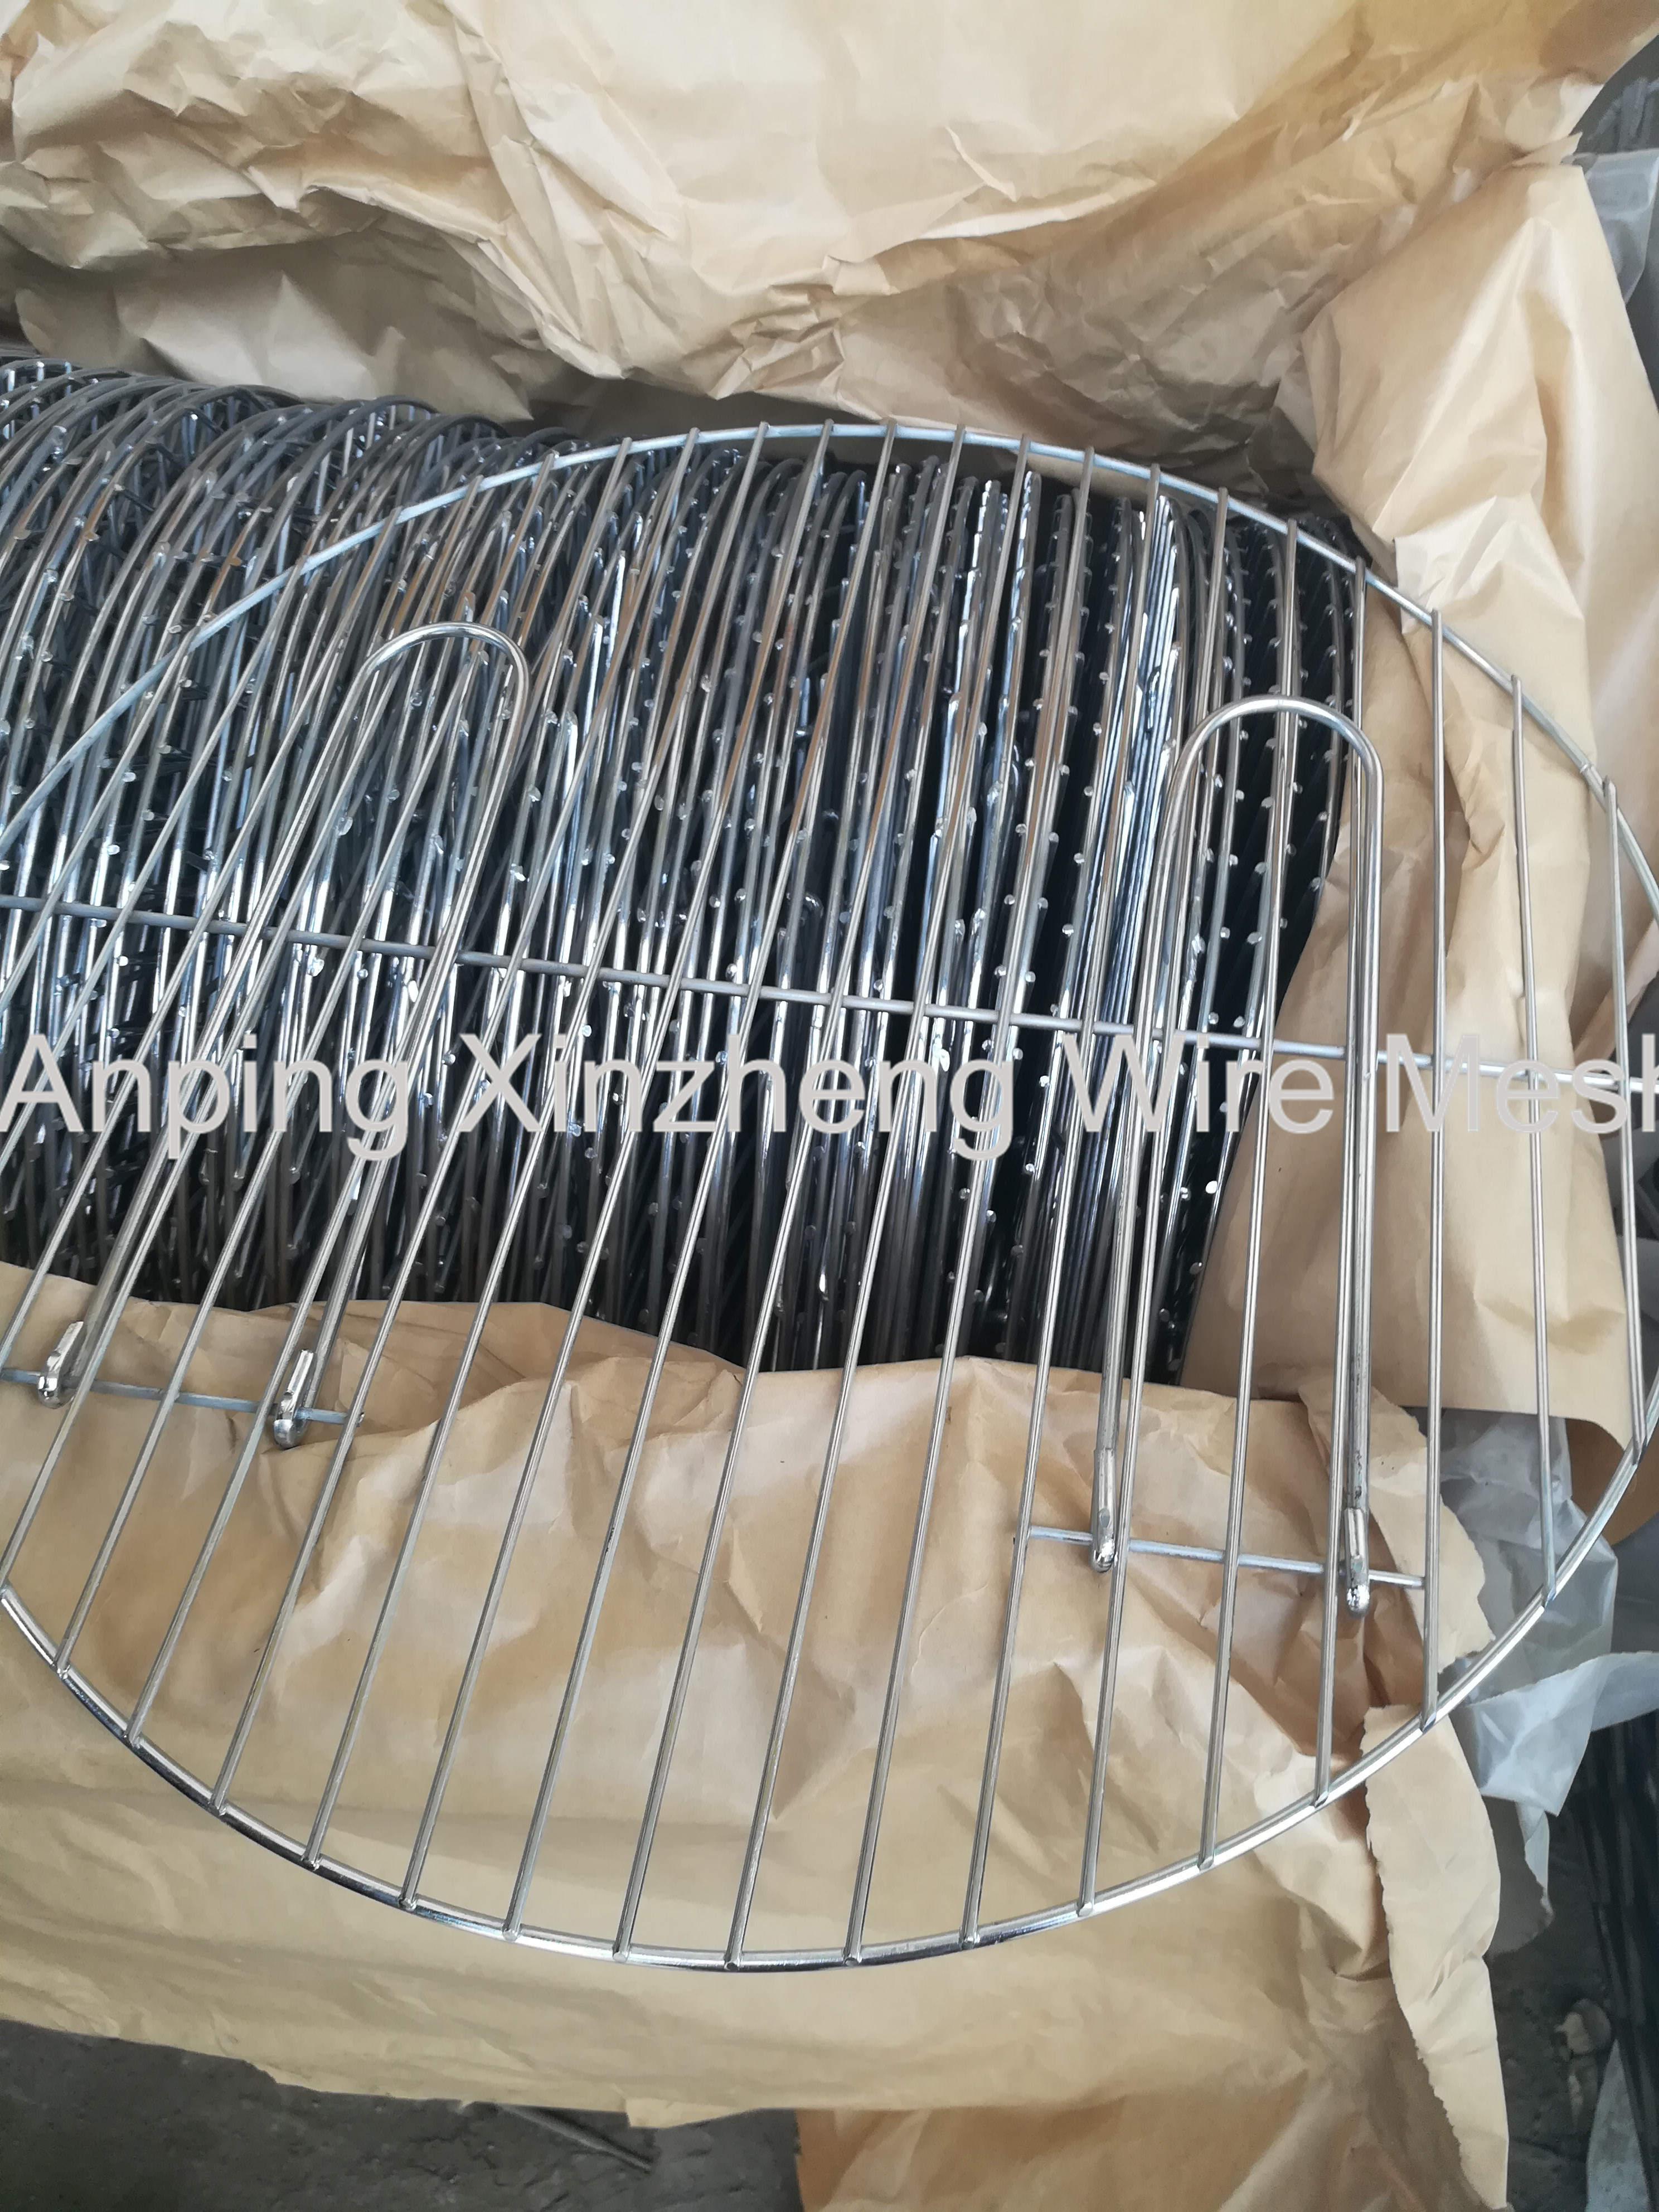 Welded Barbecue Mesh